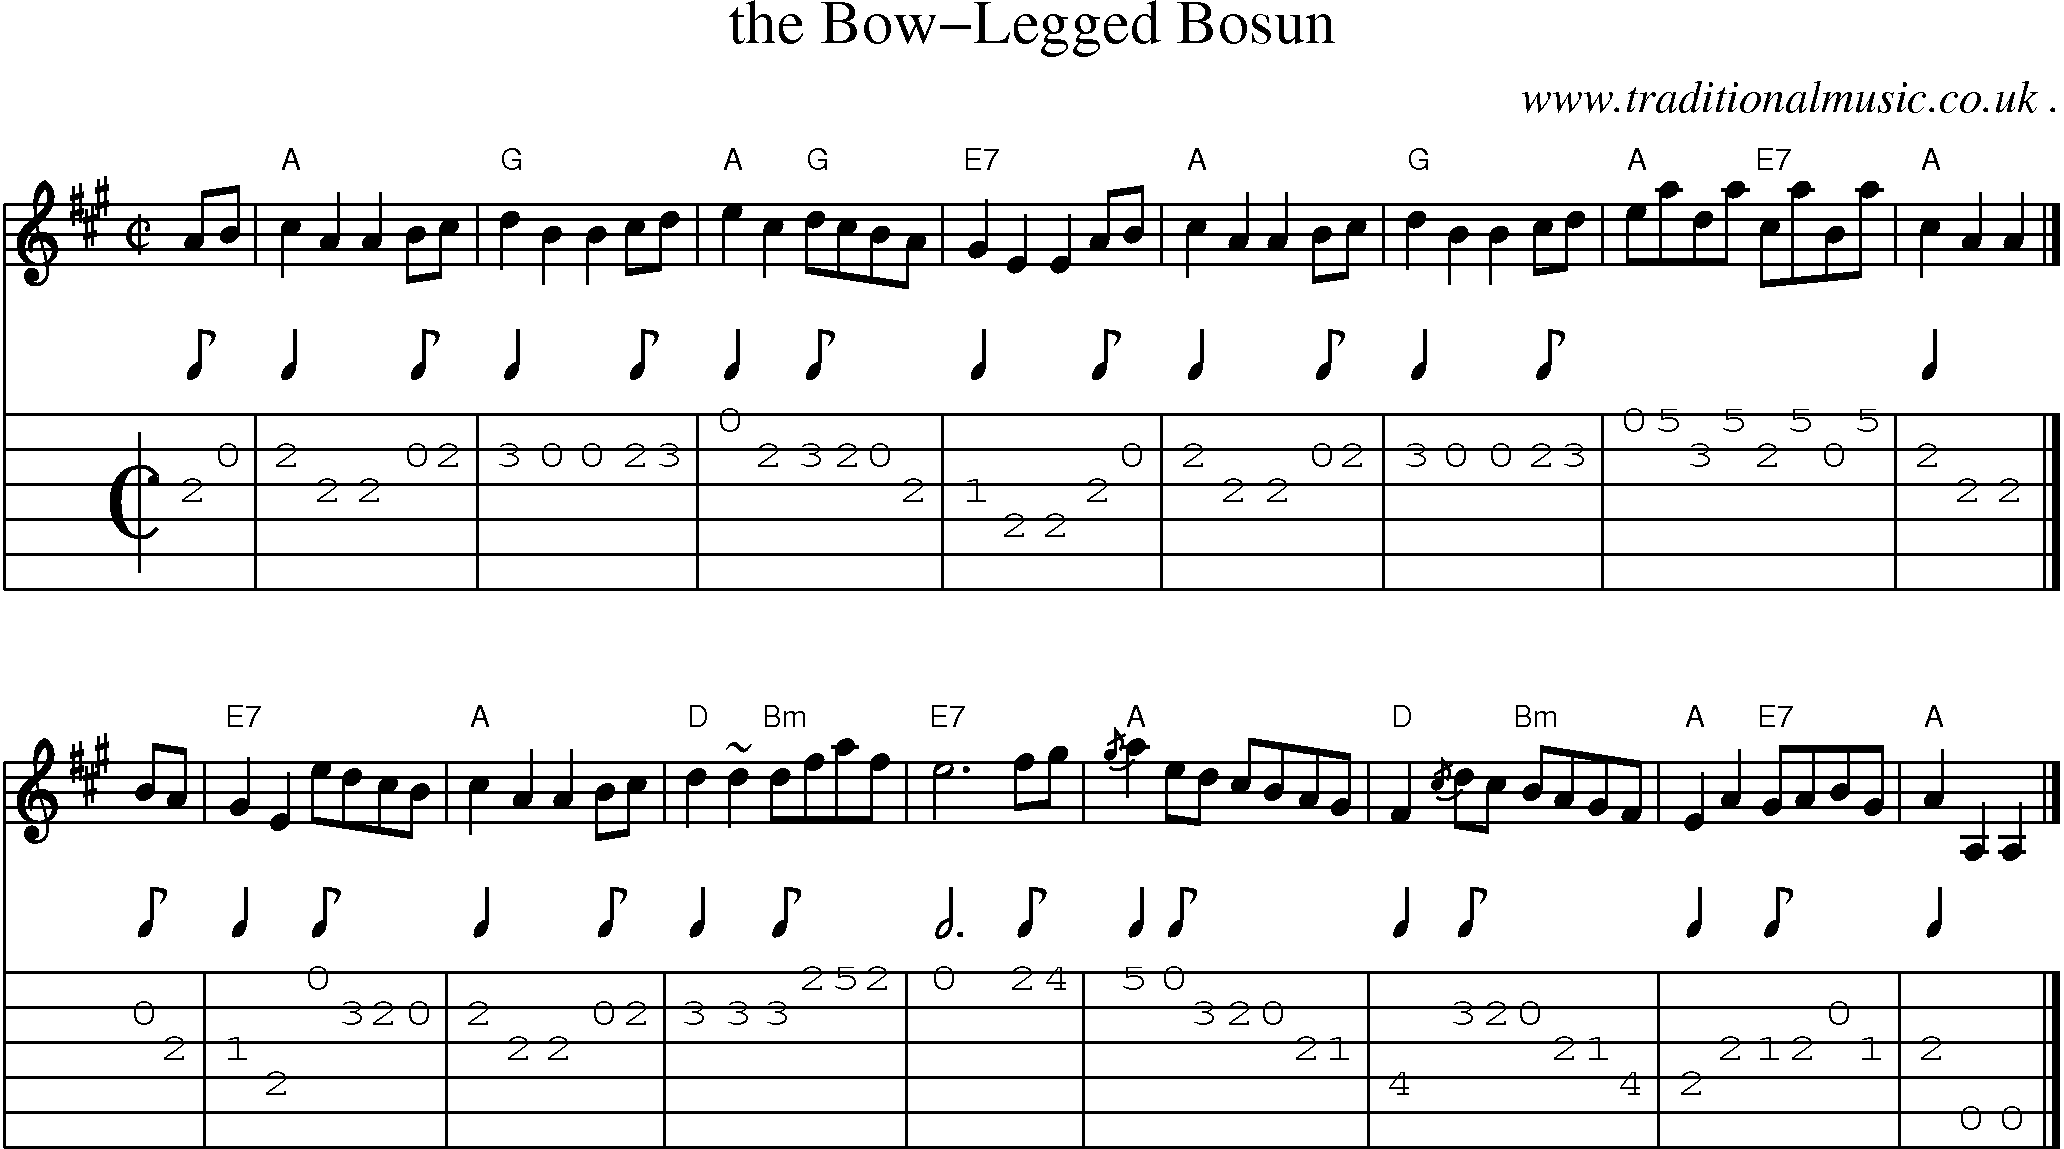 Sheet-music  score, Chords and Guitar Tabs for The Bow-legged Bosun